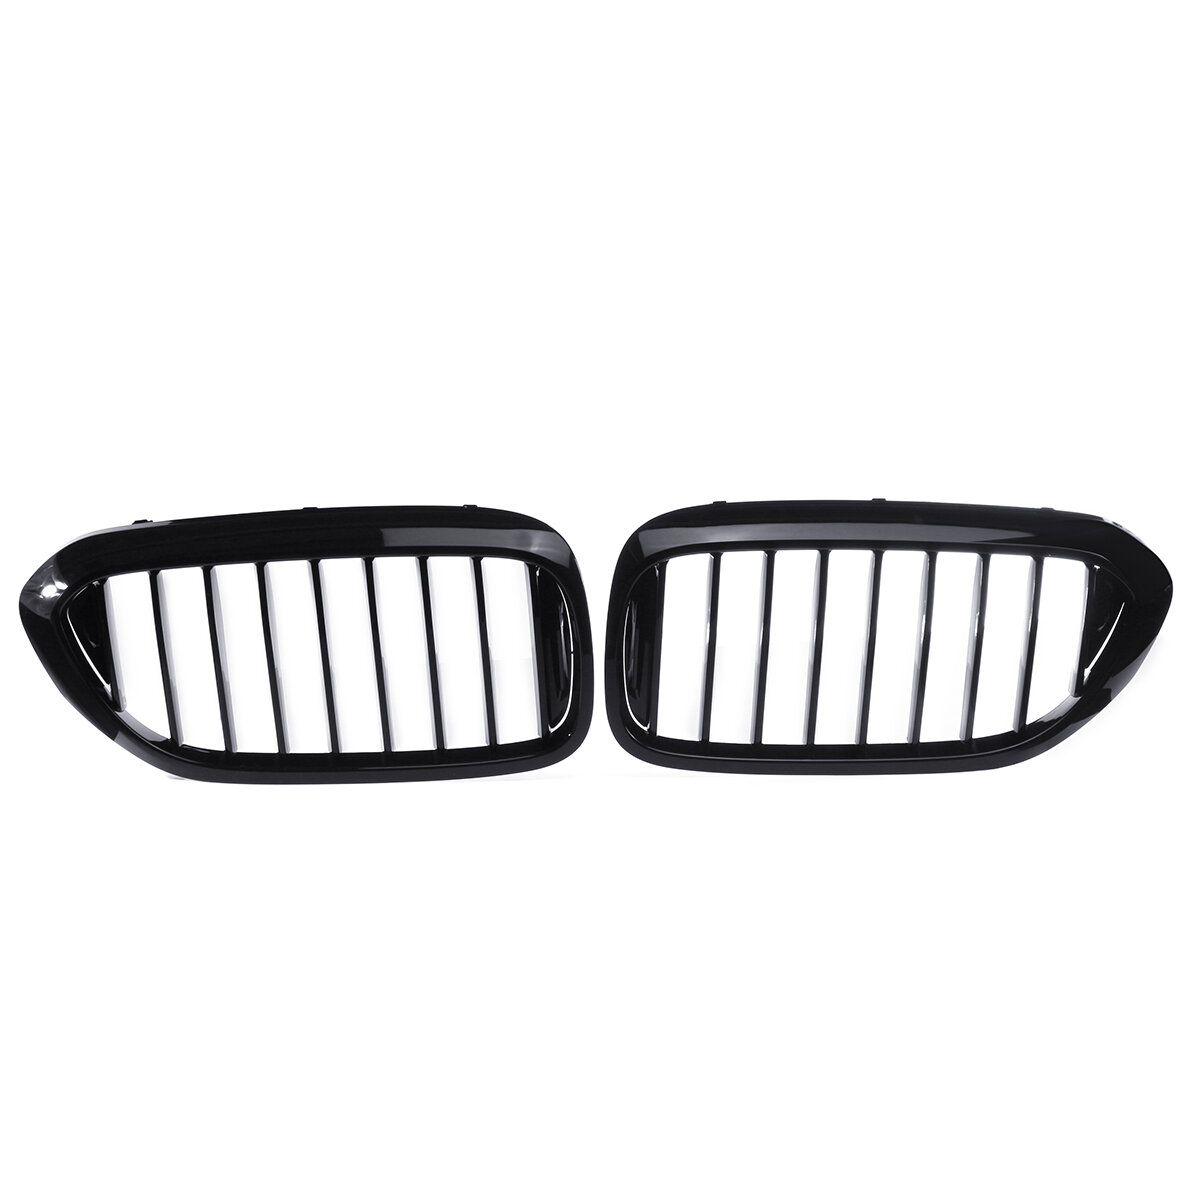 Paar Glossy Black Front Nier Grill Grille Voor BMW 5 Serie G30 G31 G38 M5 2017-2018